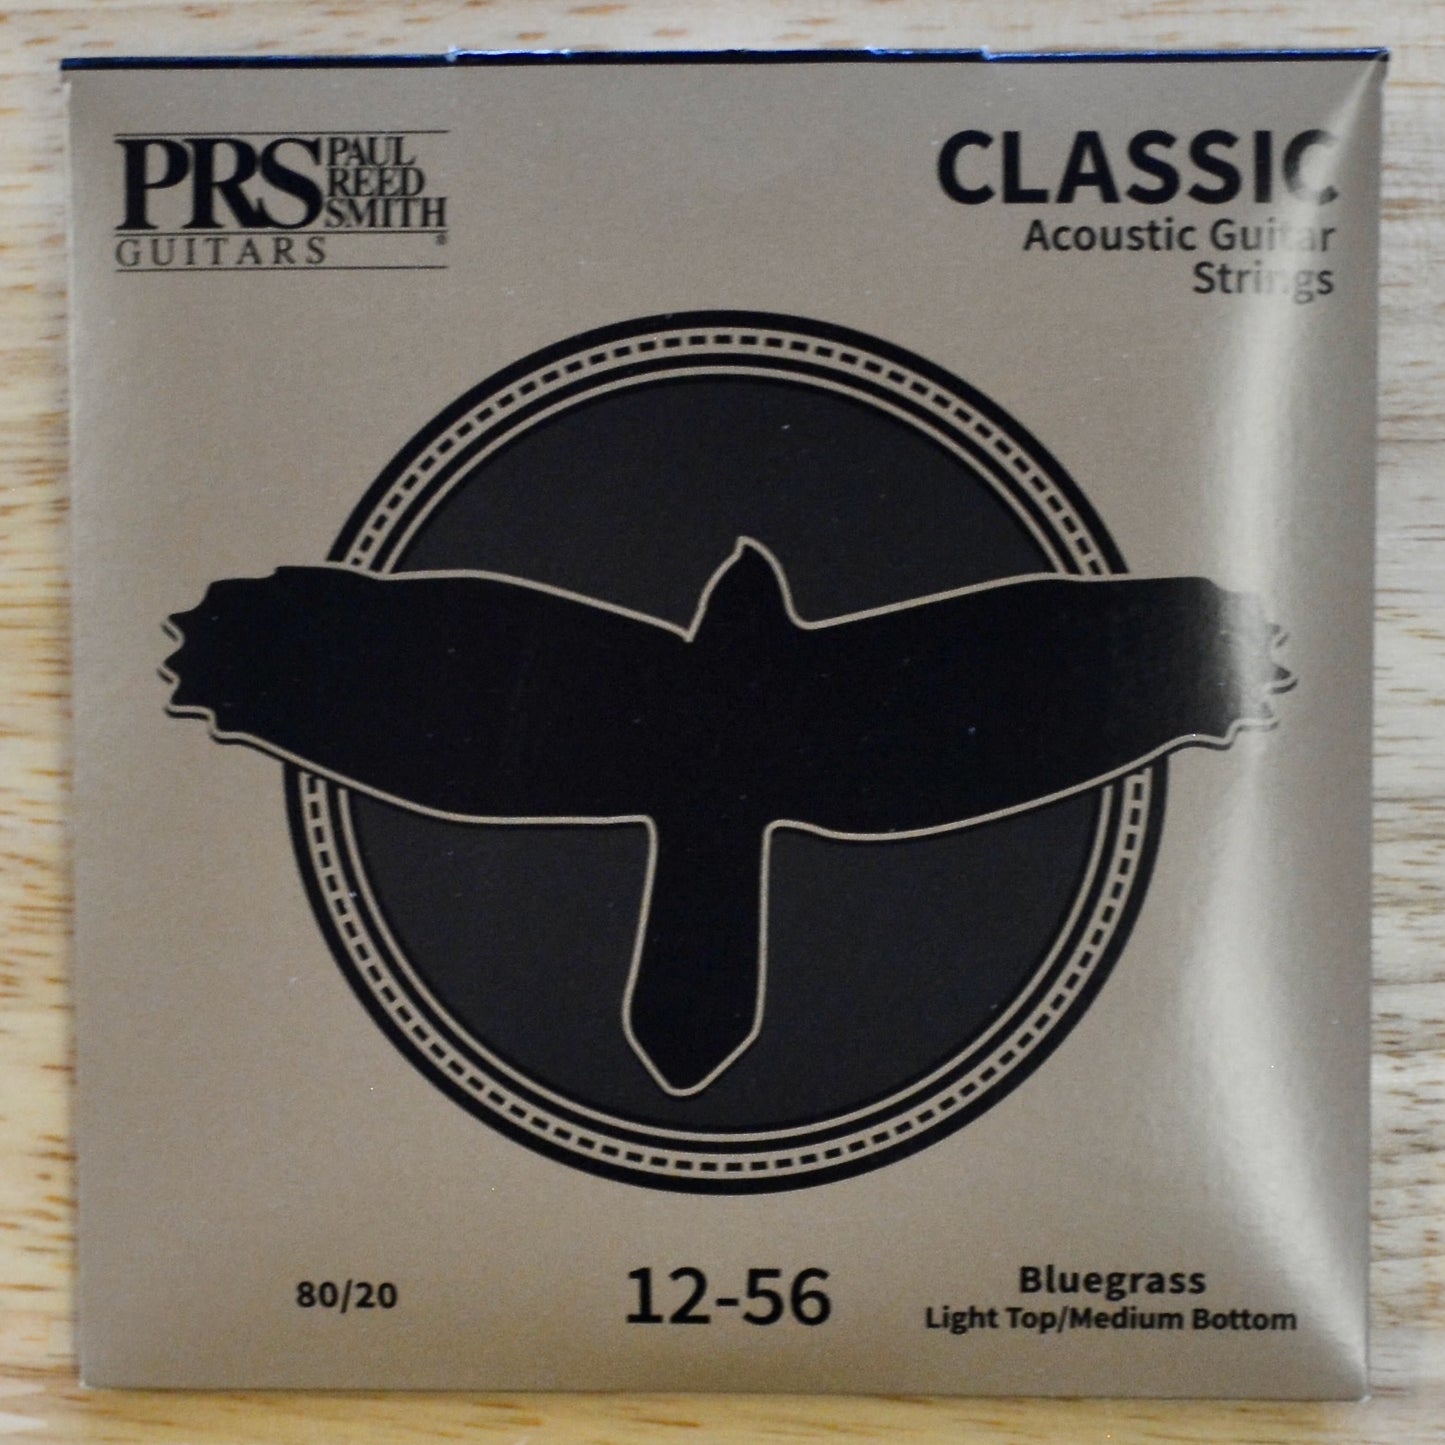 Paul Reed Smith Classic Acoustic Guitar Strings 80/20 Bronze, Bluegrass 12-56